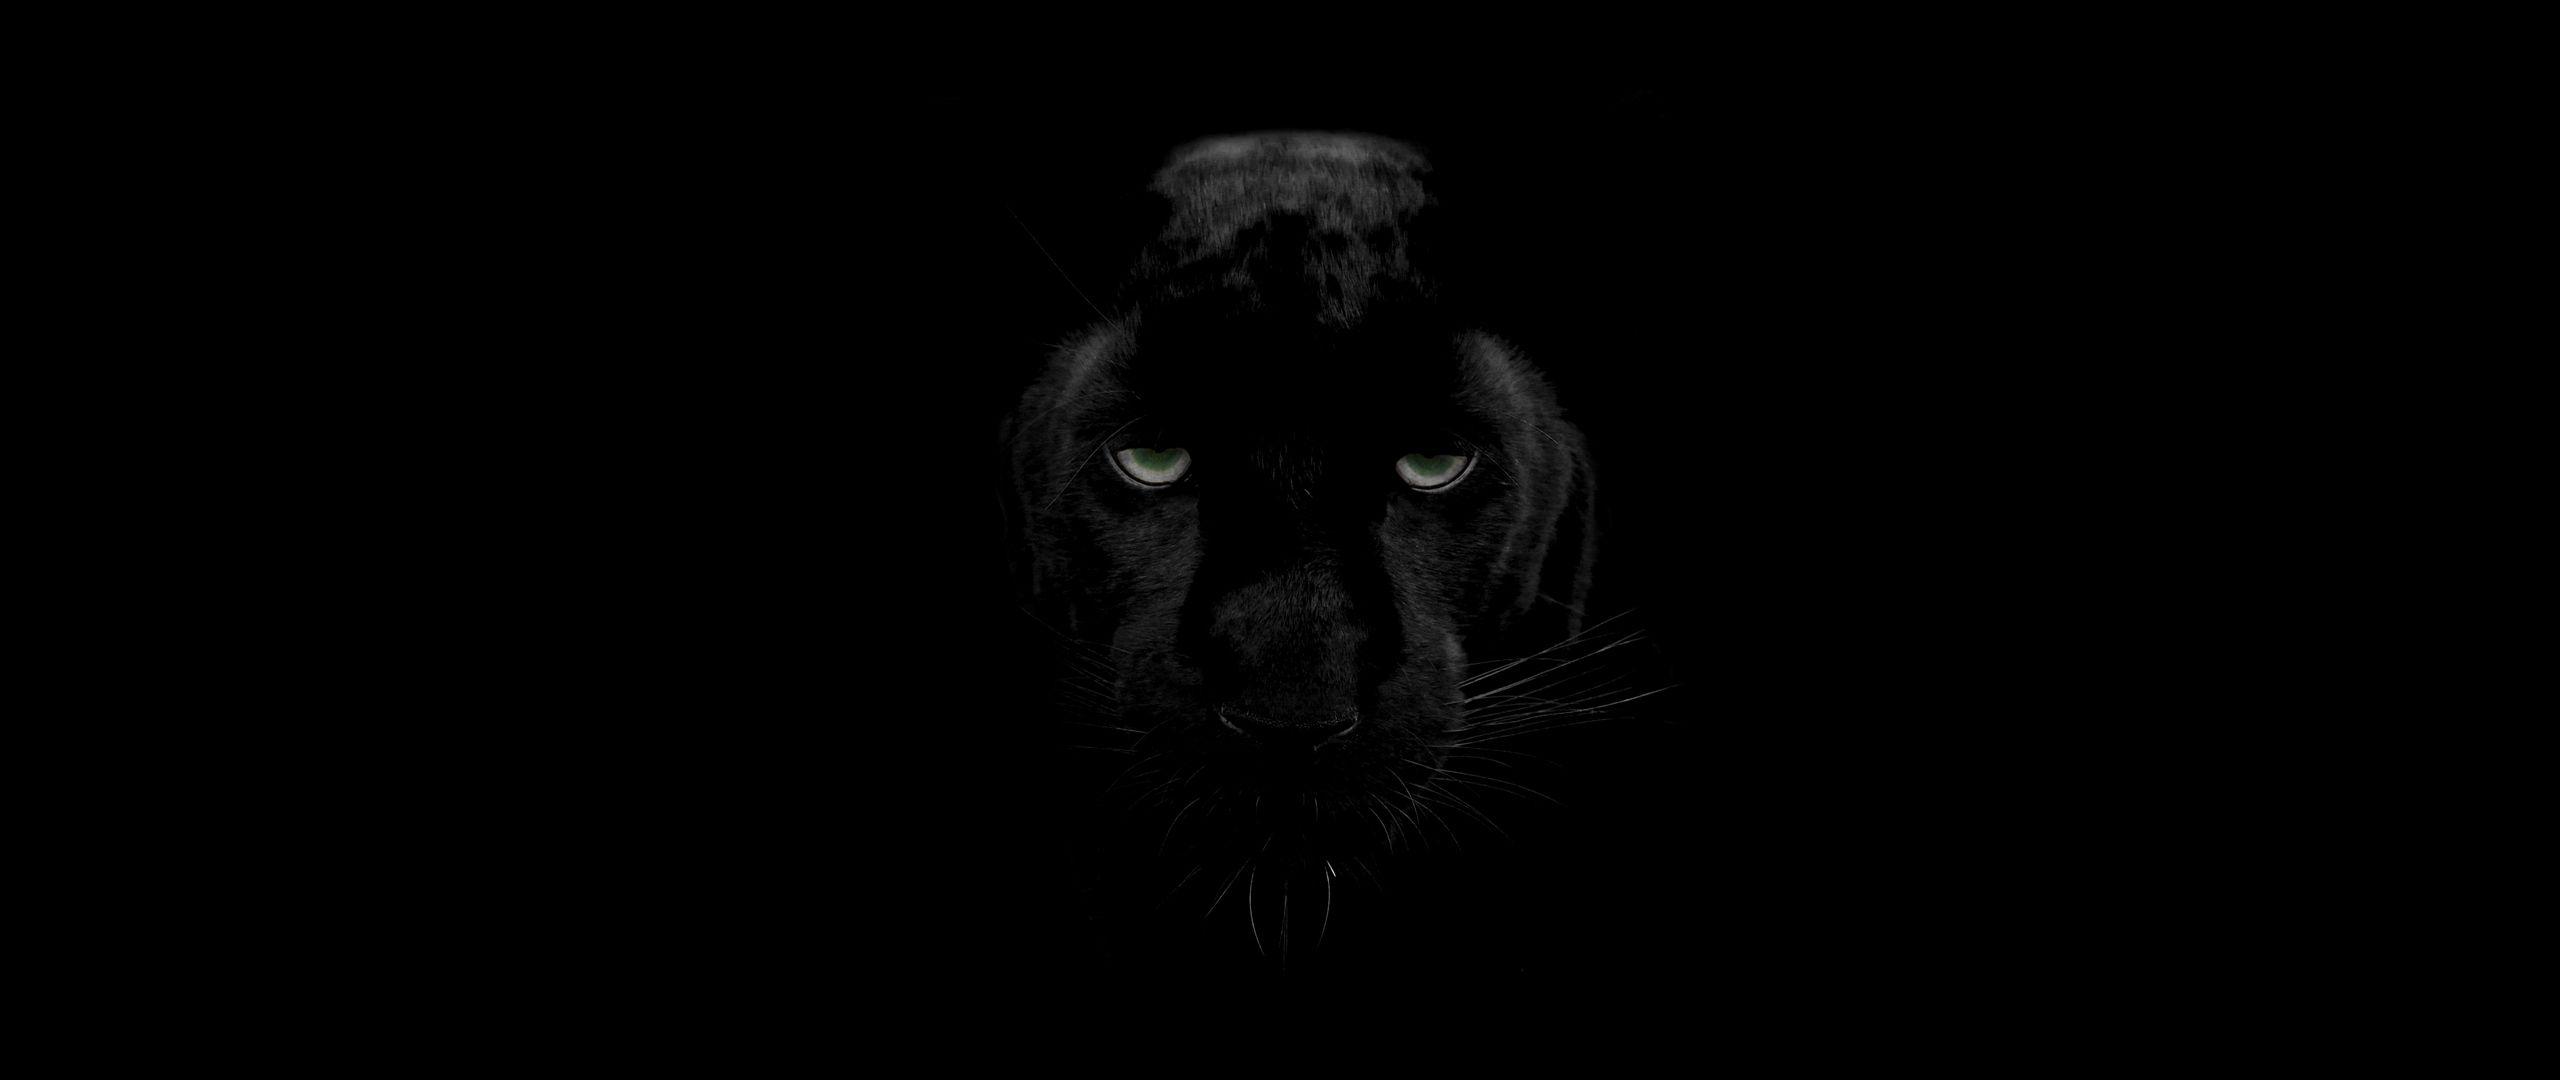 Black Panther Face Wallpapers Top Free Black Panther Face Backgrounds Wallpaperaccess